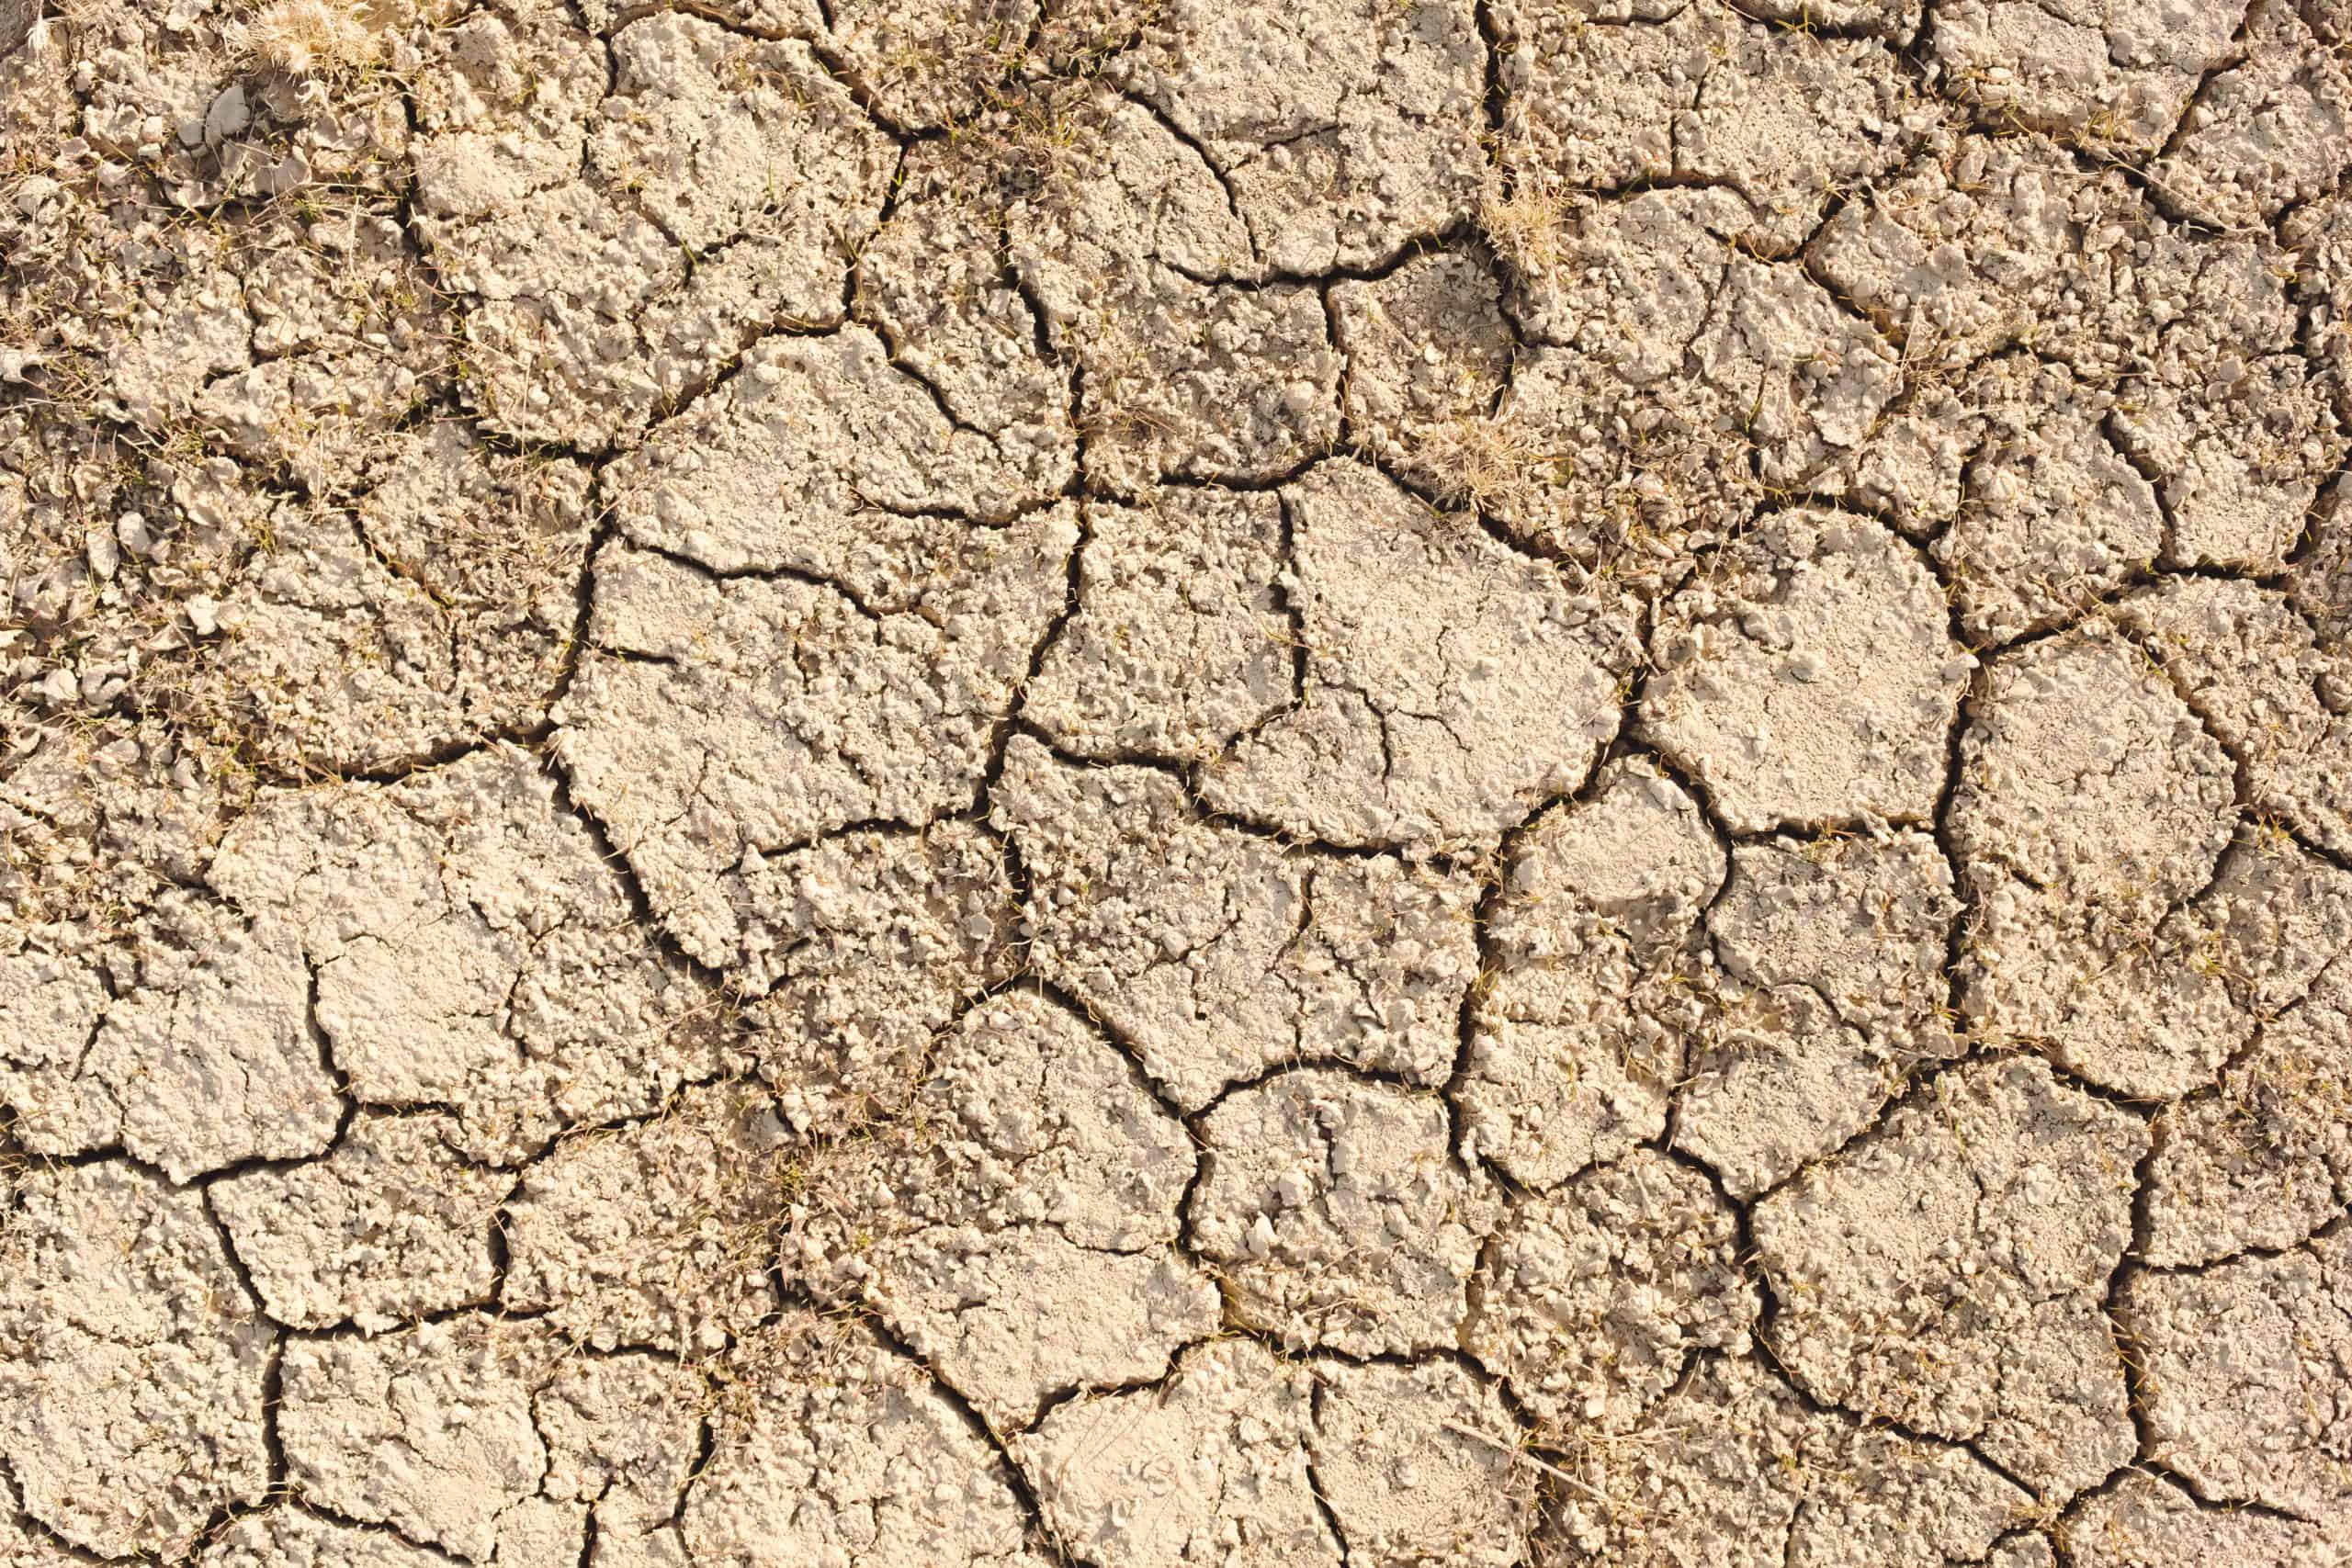 Cracked soil in a dry, hot climate